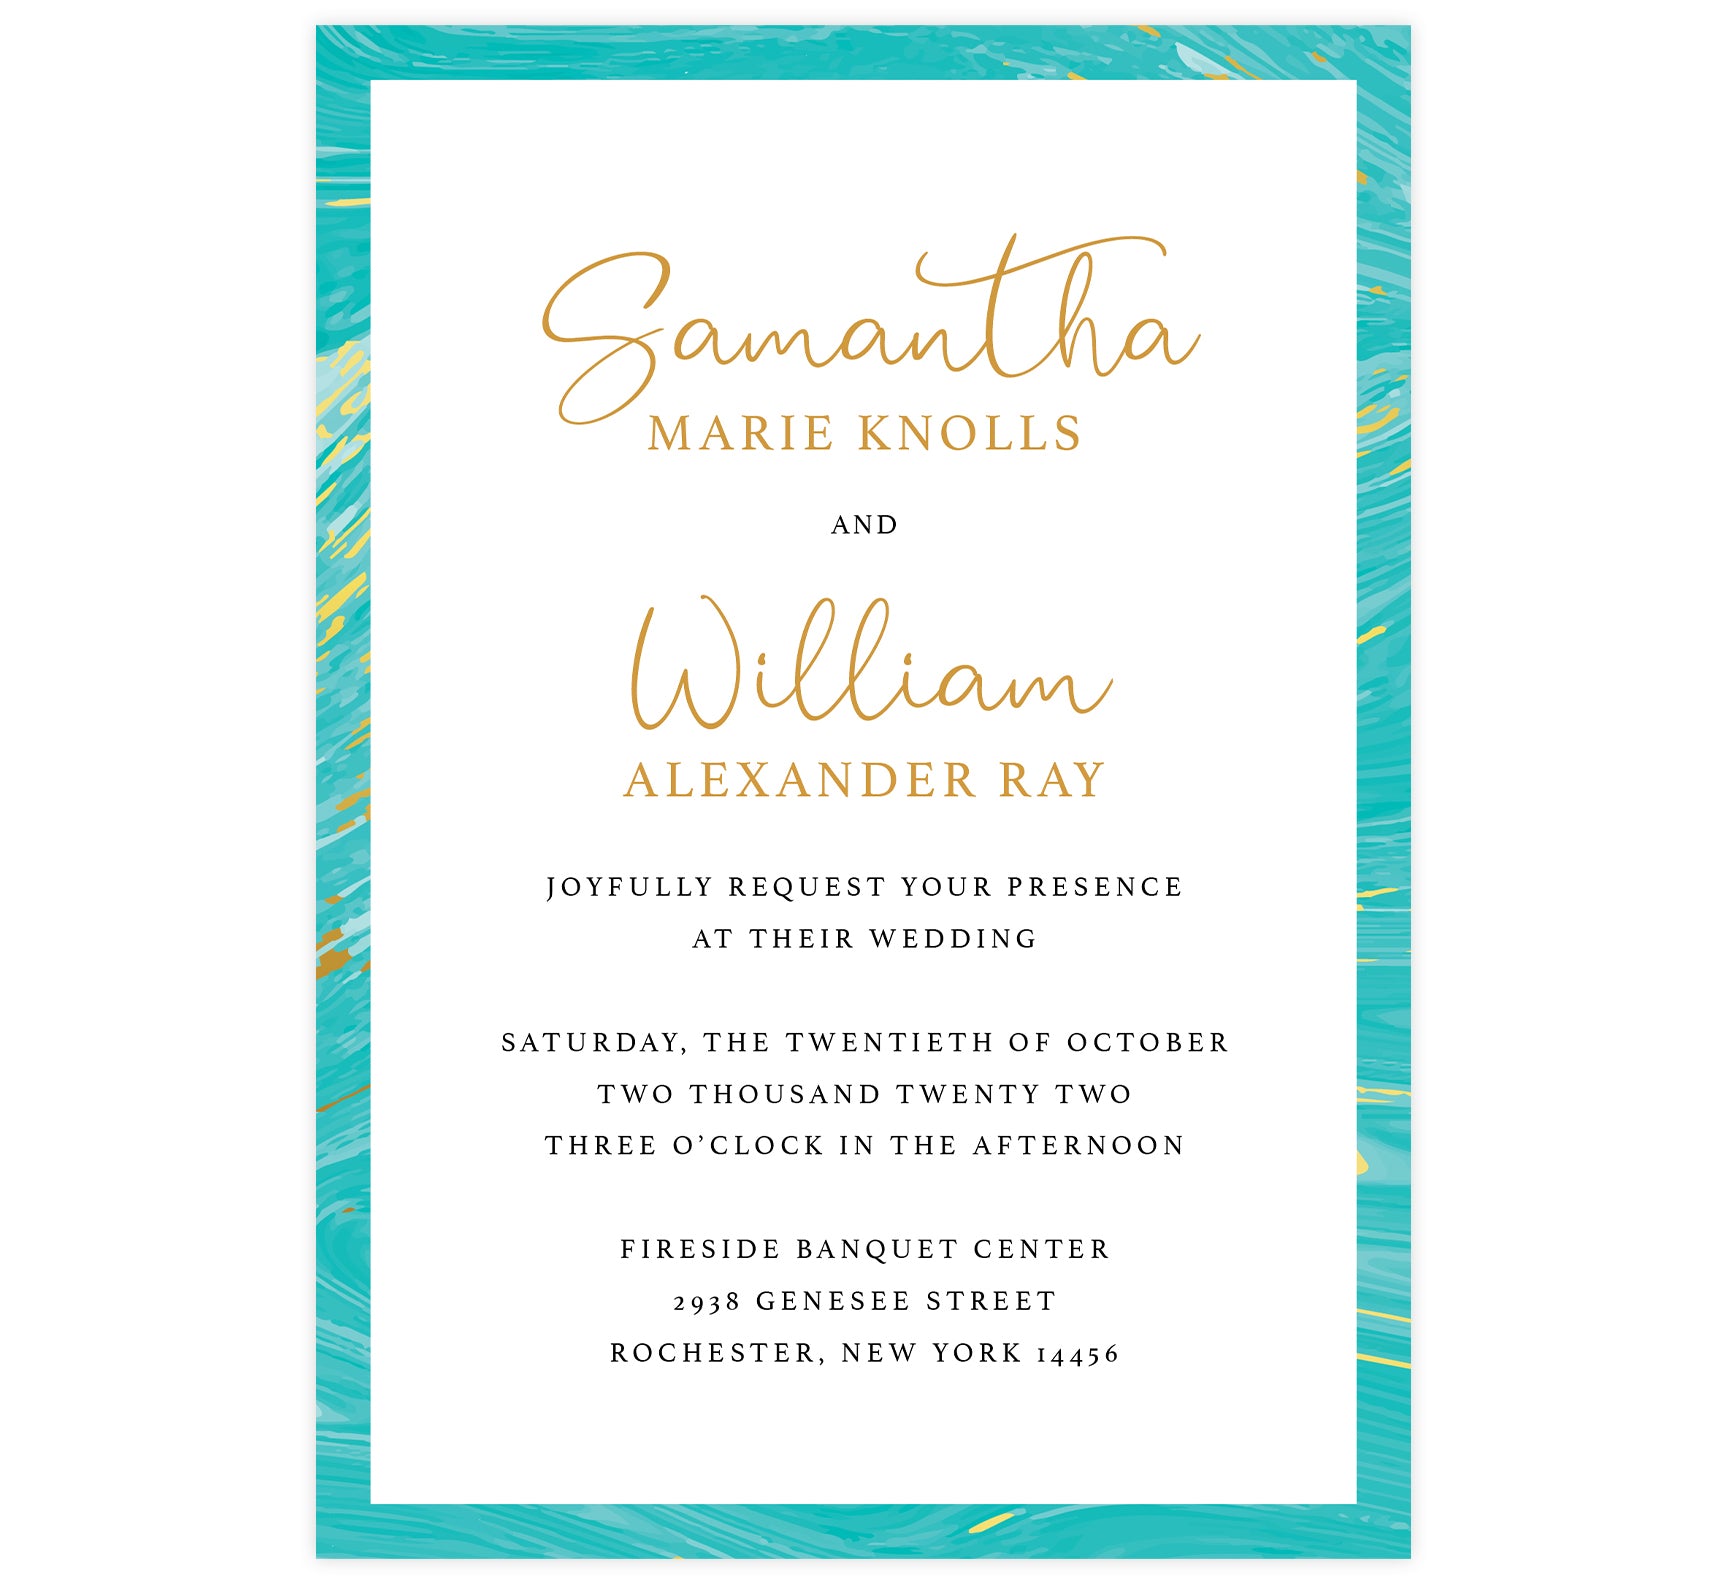 Teal and gold marble wedding invitation; white background with marble teal and gold frame on the outside edges, black text with names in gold